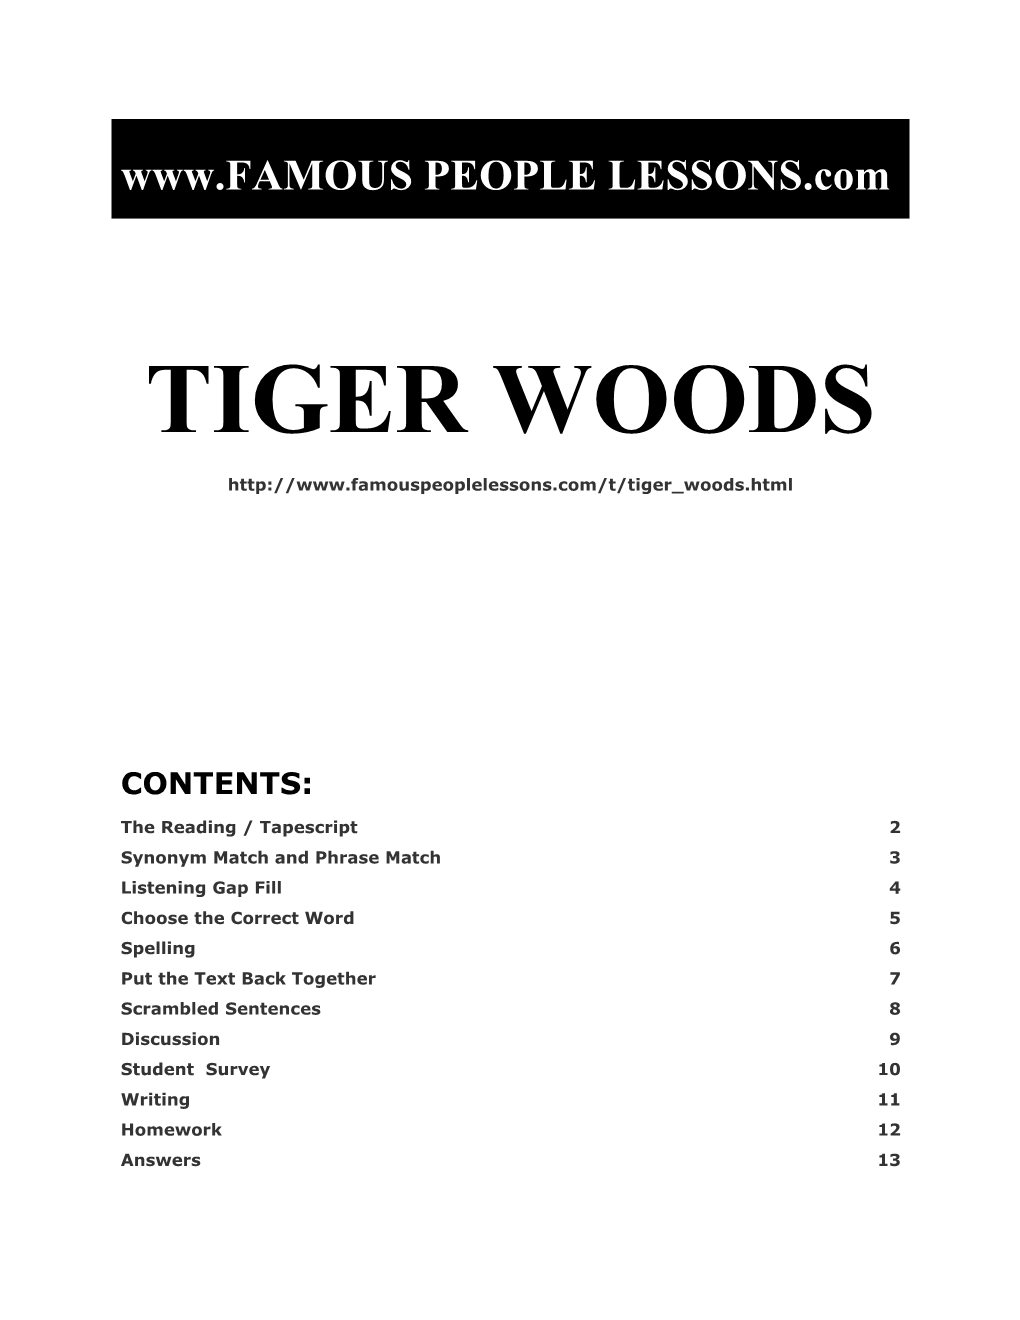 Famous People Lessons - Tiger Woods